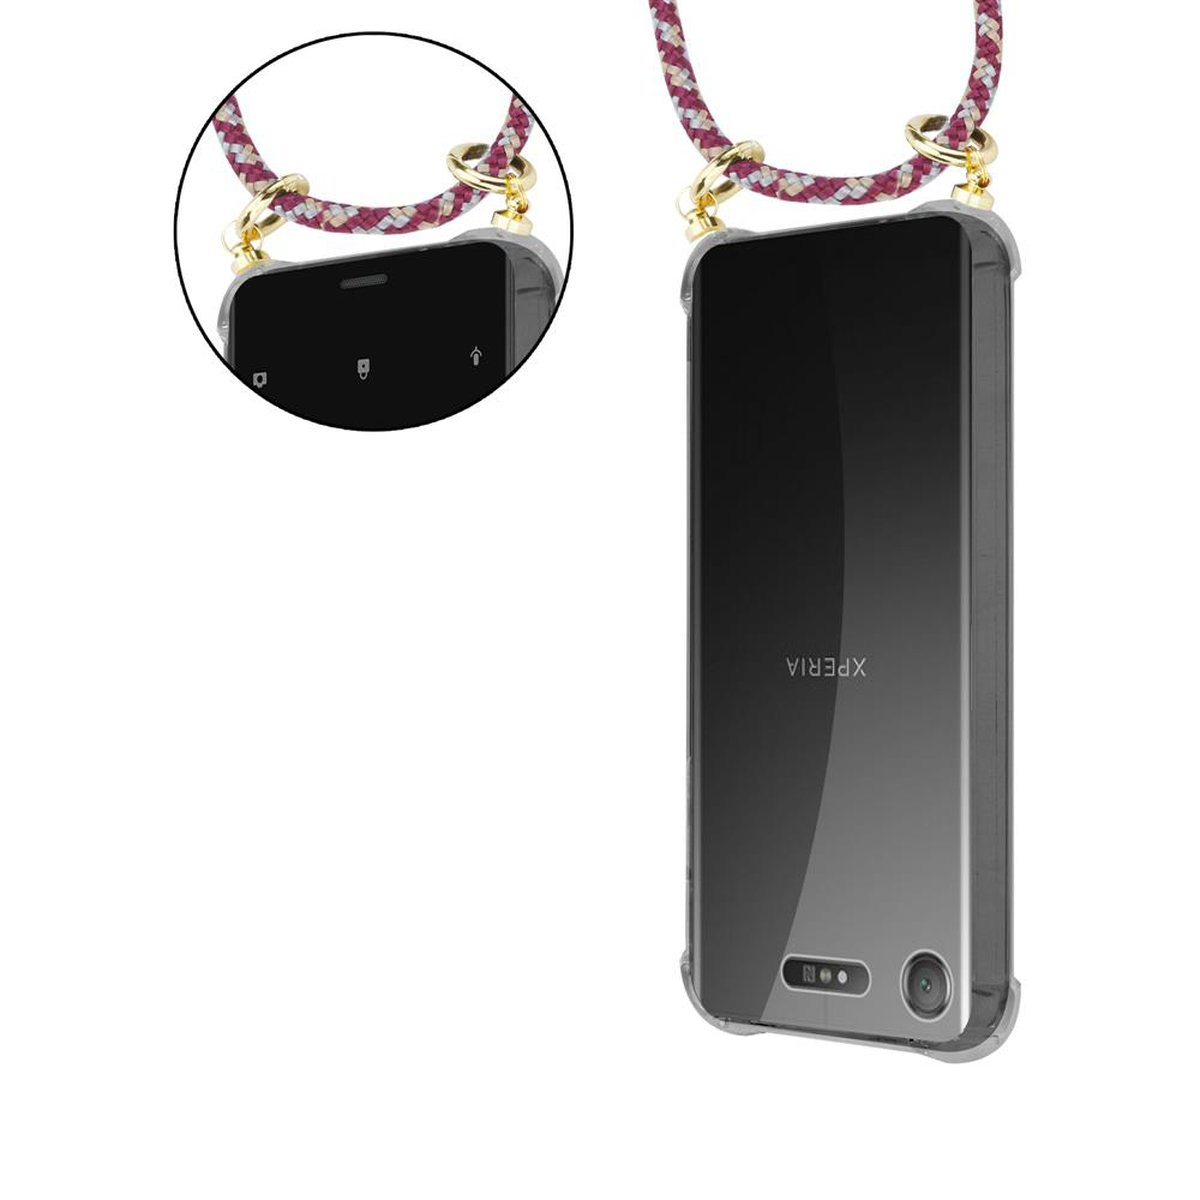 CADORABO Handy Kette Ringen, Kordel GELB Gold ROT WEIß Band abnehmbarer XZ1, Backcover, Xperia und Hülle, mit Sony